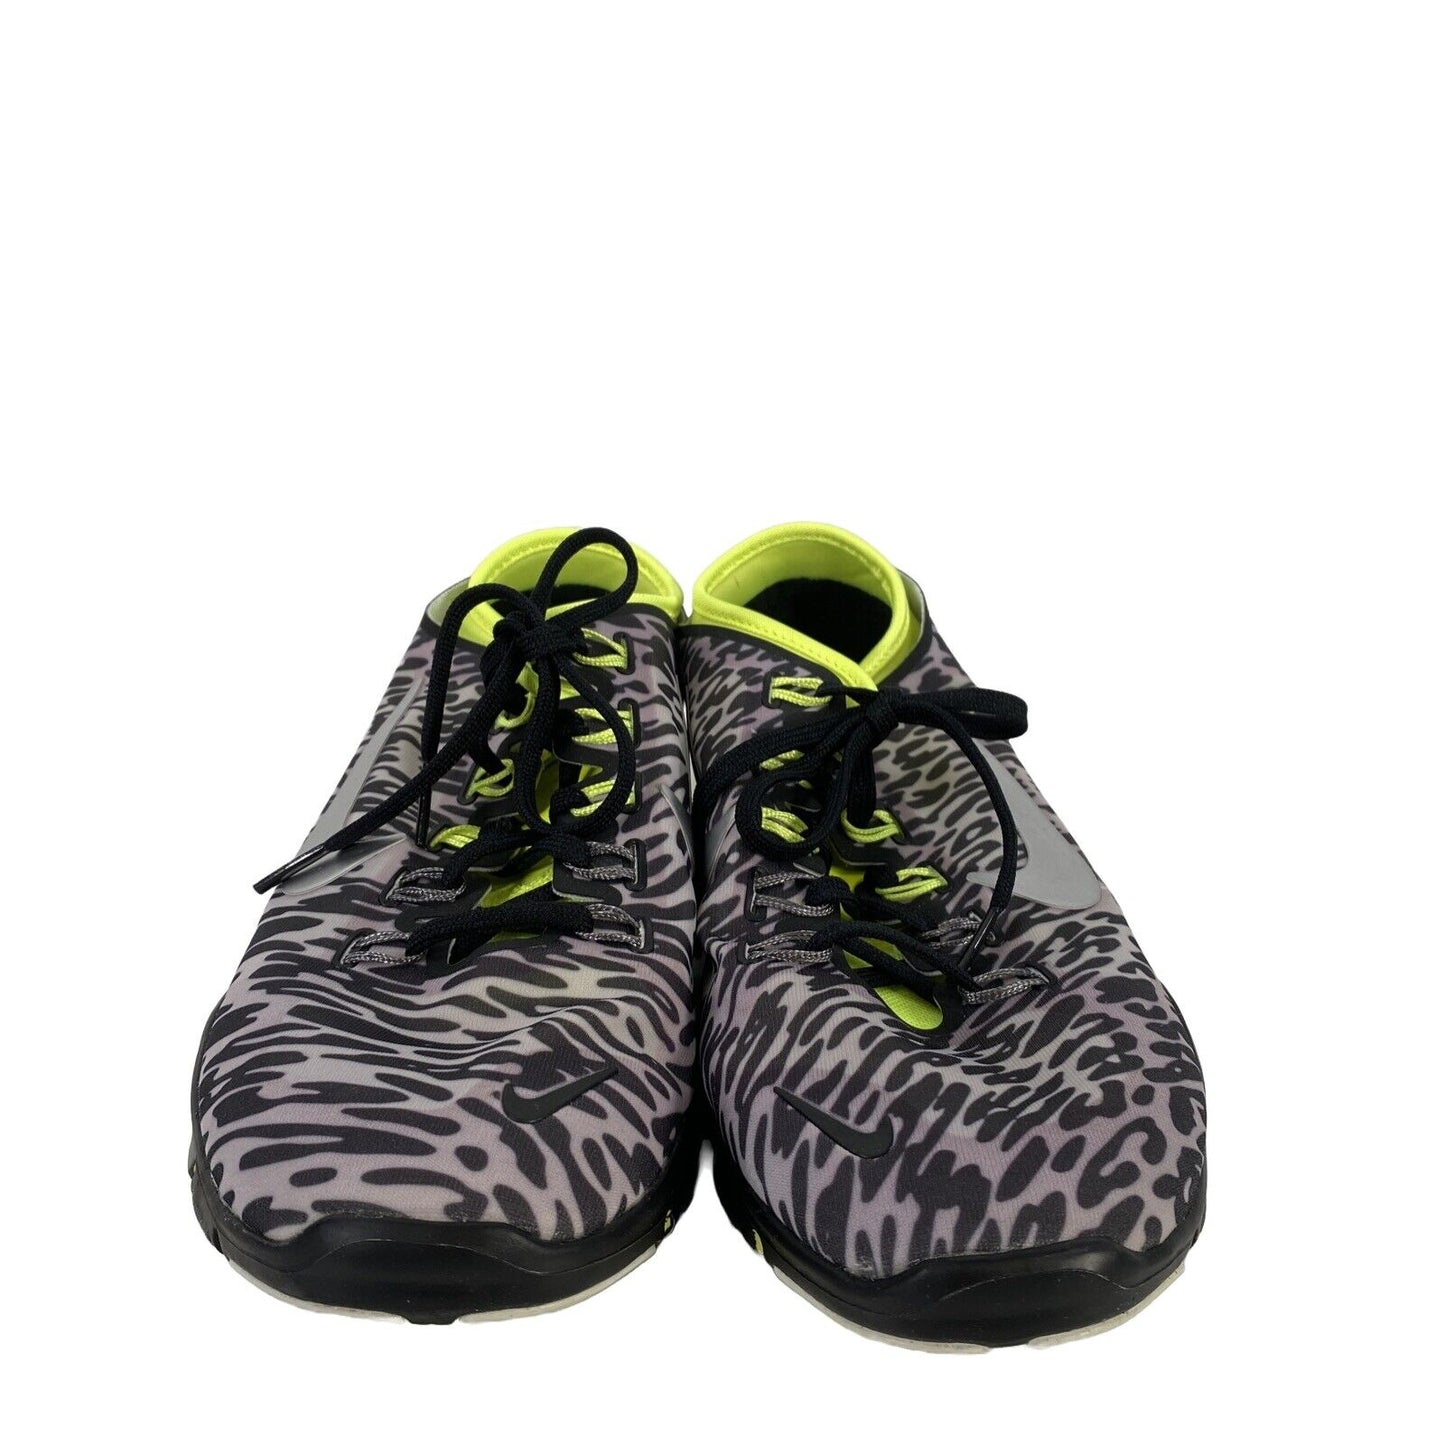 Nike Free Women's Black/Green 638680 TR Connect 2 Running Shoes - 8.5